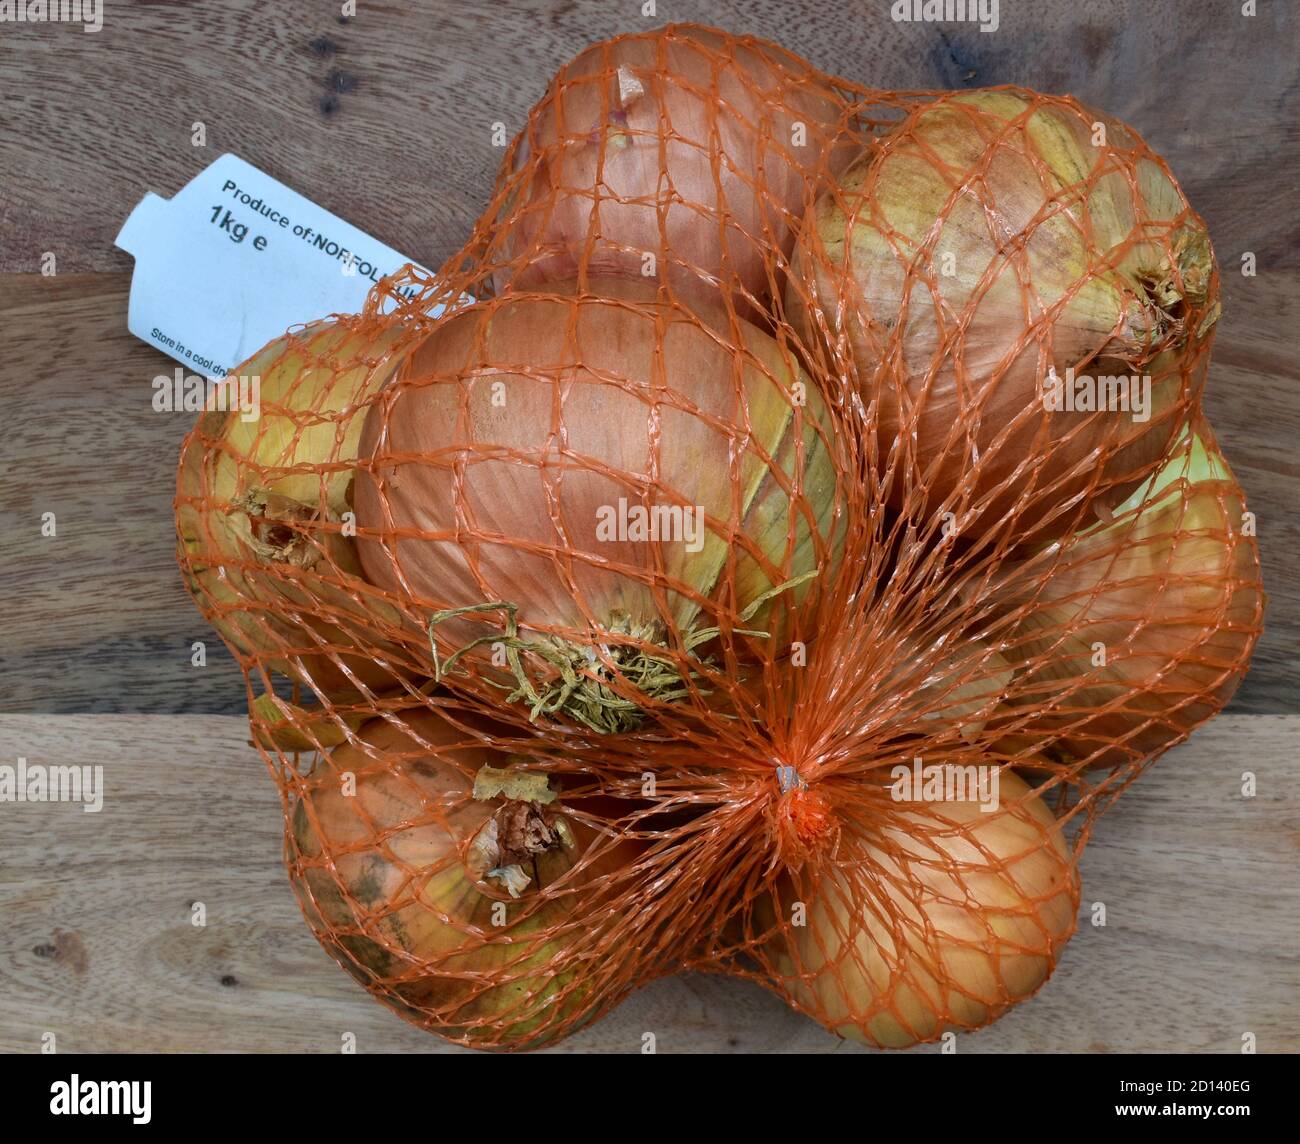 Onions, fresh, in plastic netting from a Norfolk farm supplier. Stock Photo